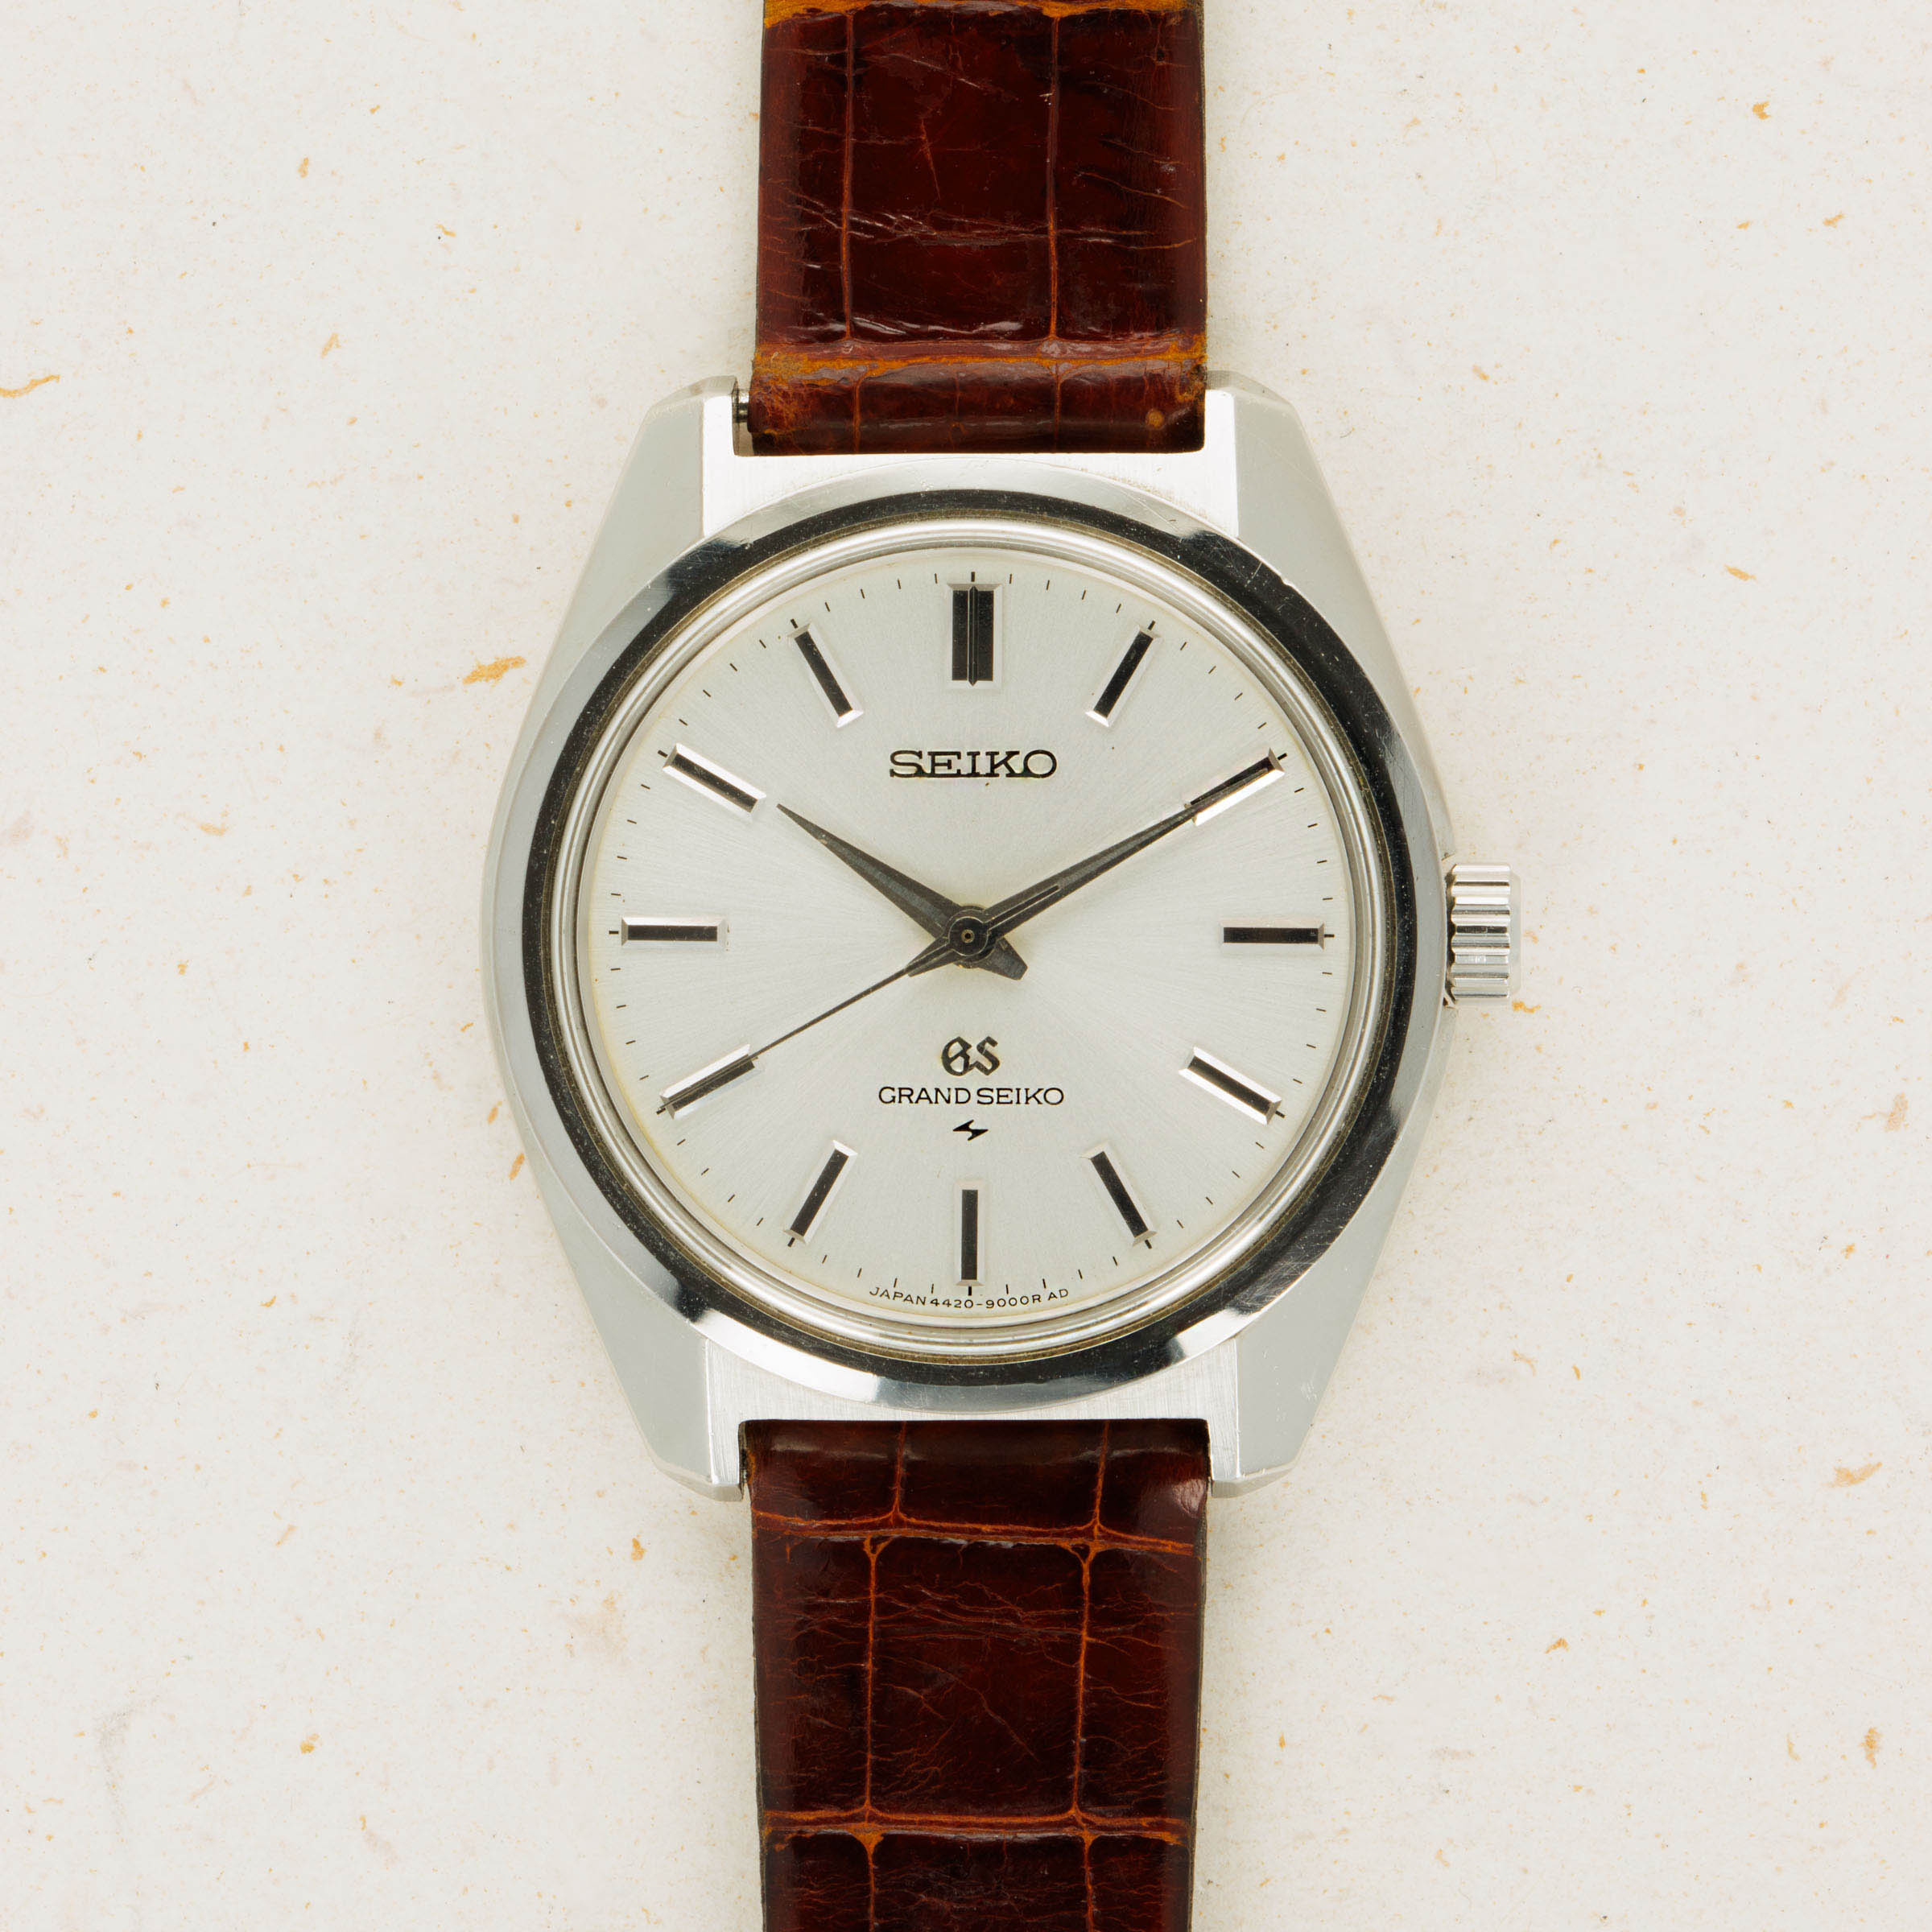 Grand Seiko 44GS 4420-9000 | Auctions | Loupe This